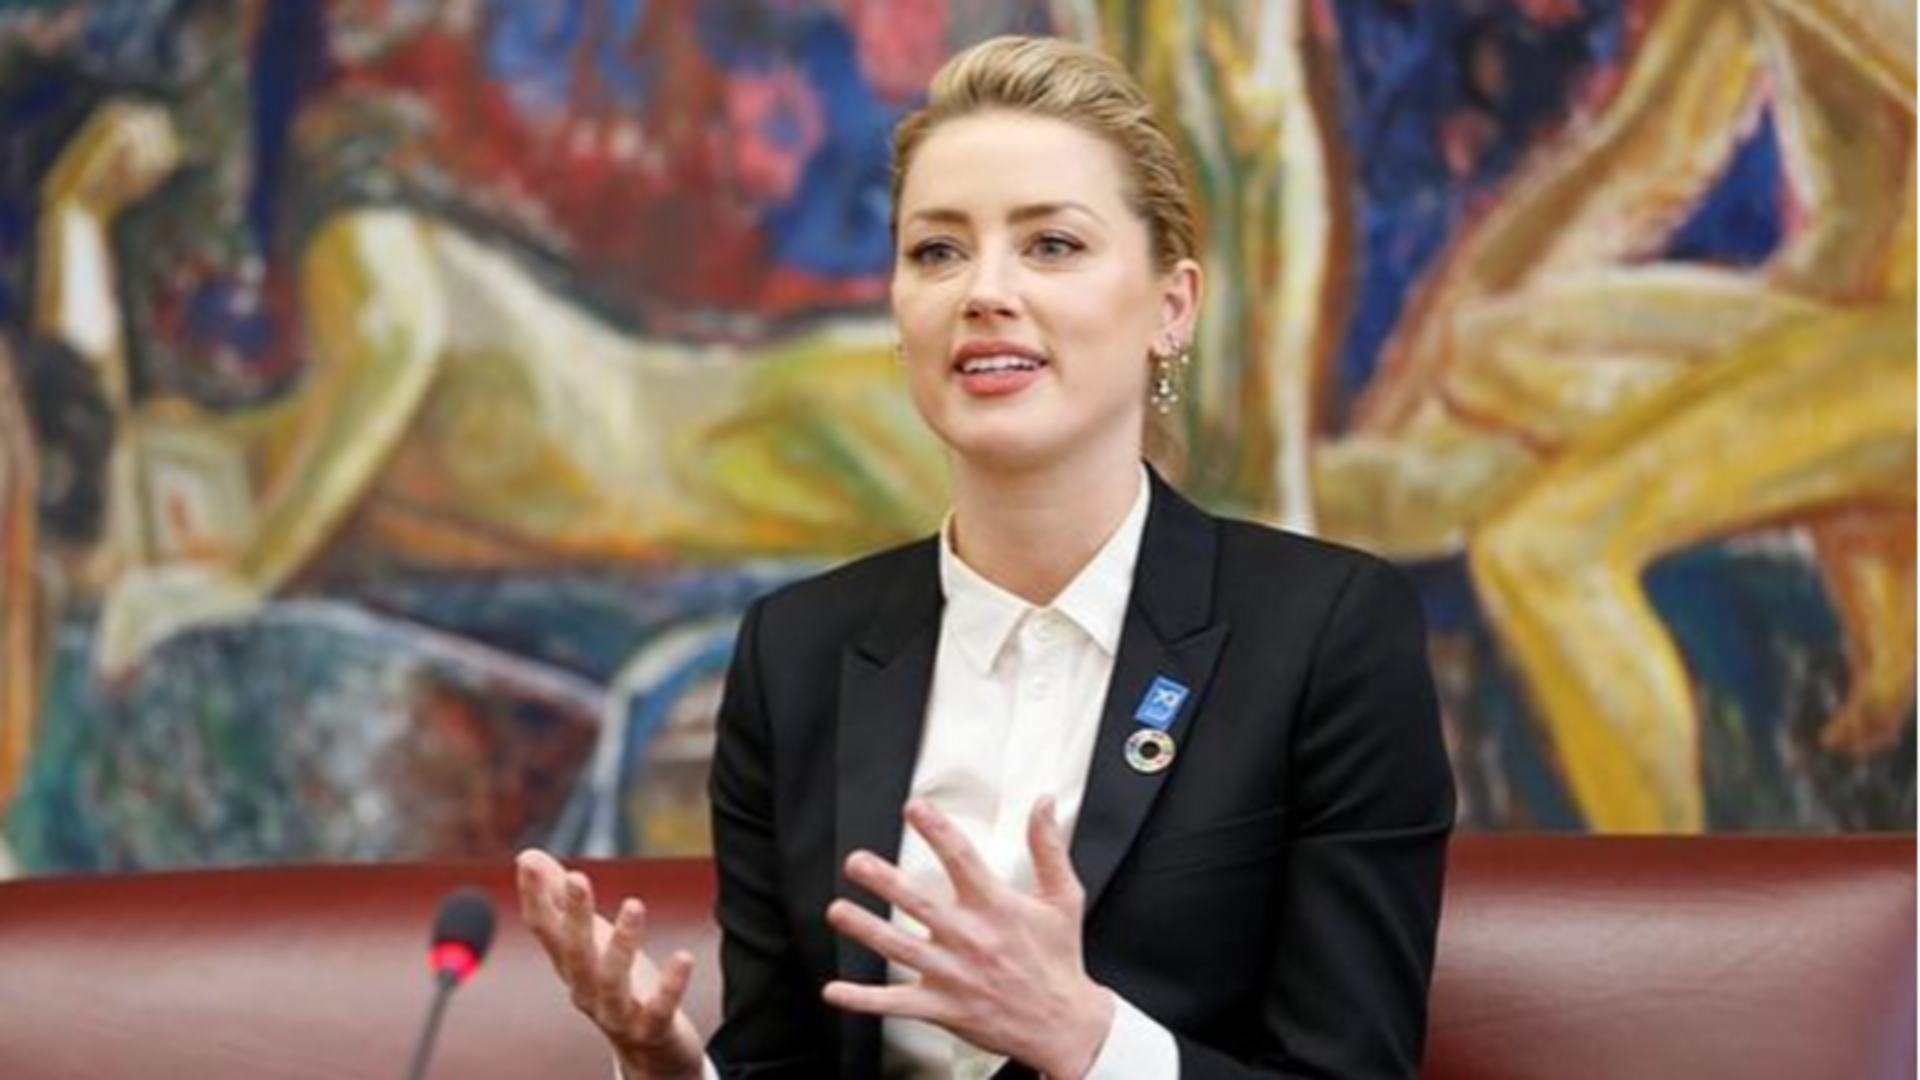 Months after trial, feminist organizations, experts rally for Amber Heard